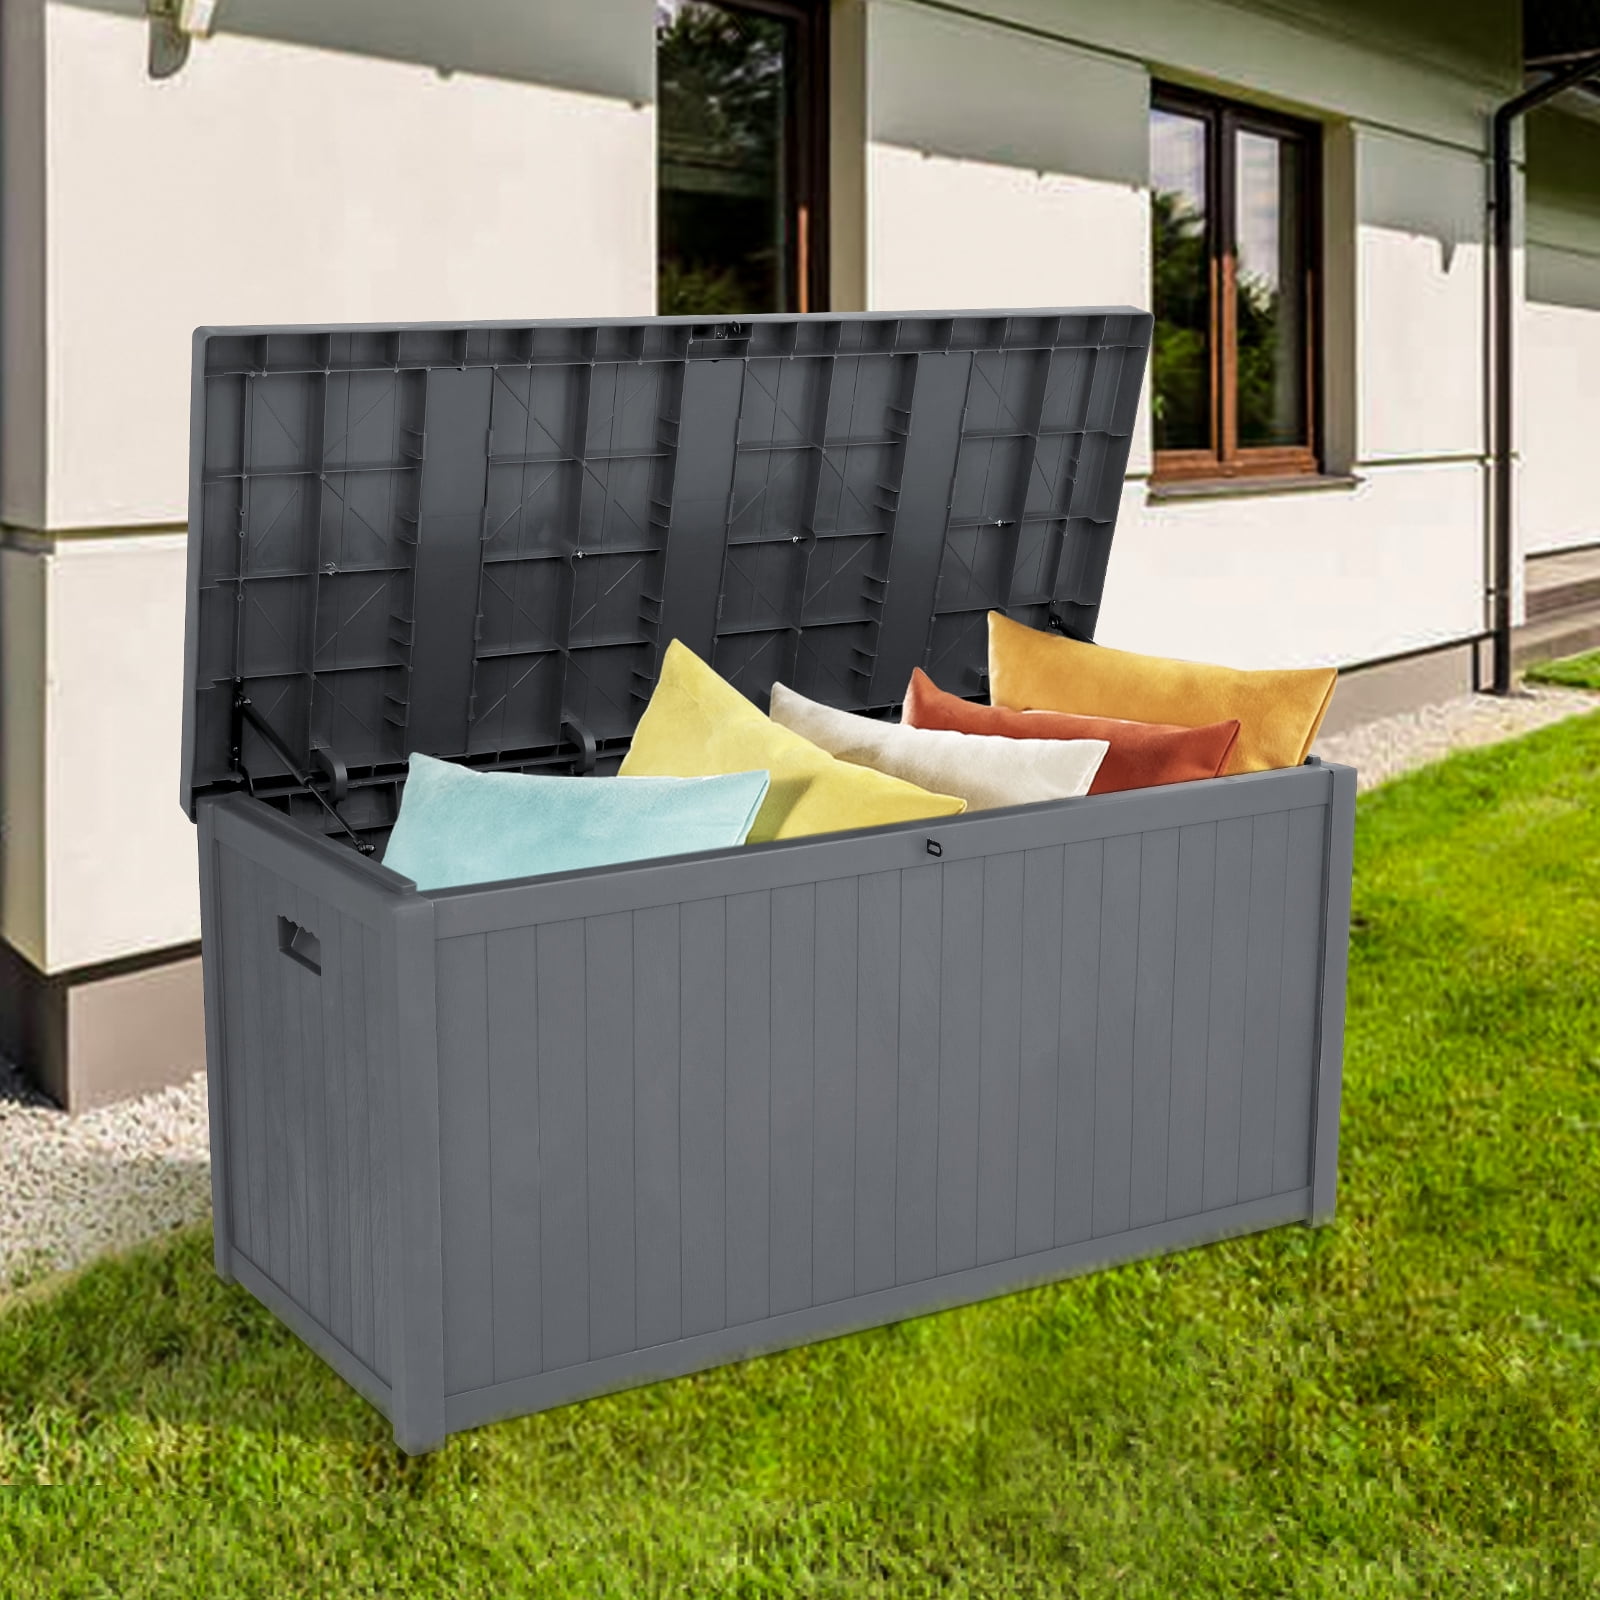 113gal　430L　lockable　plastic　tool　box　gt3-ly　seat　table　for　garden　cushion　stori-　storage　toy　Mushugu　suitable　outdoor　garden